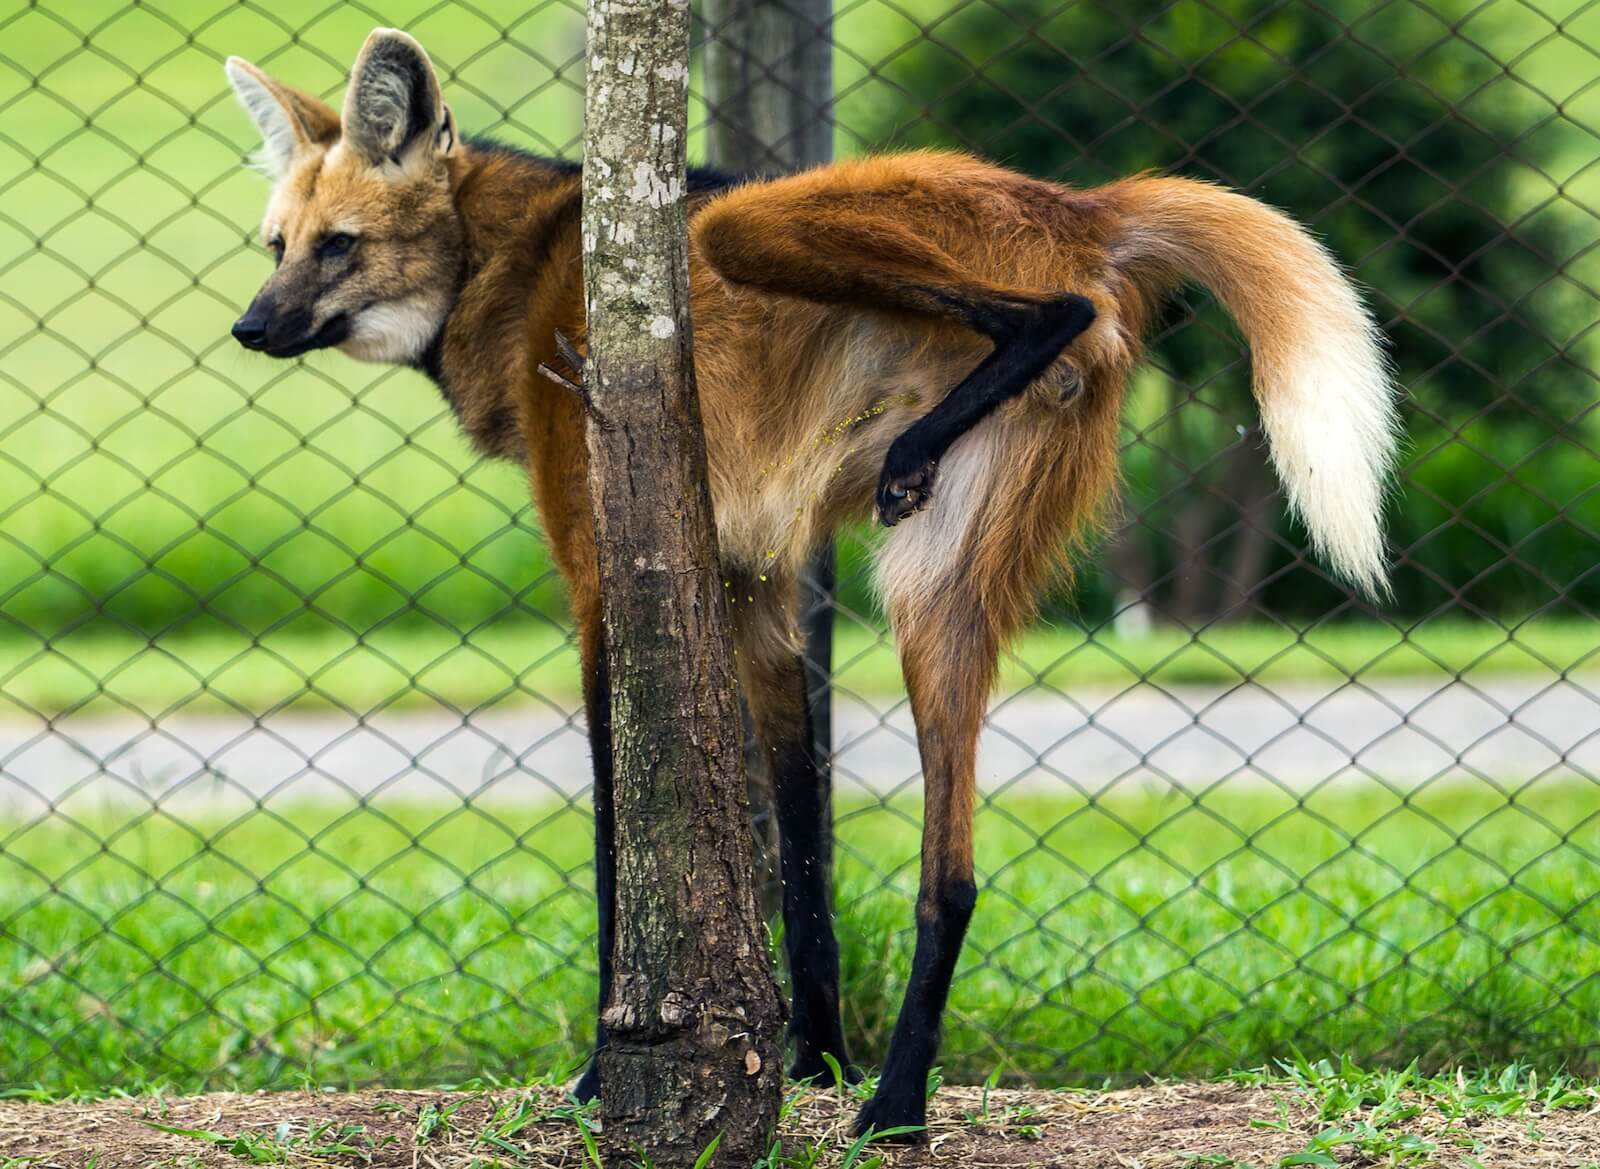 The Maned Wolf and why its urine smells of cannabis